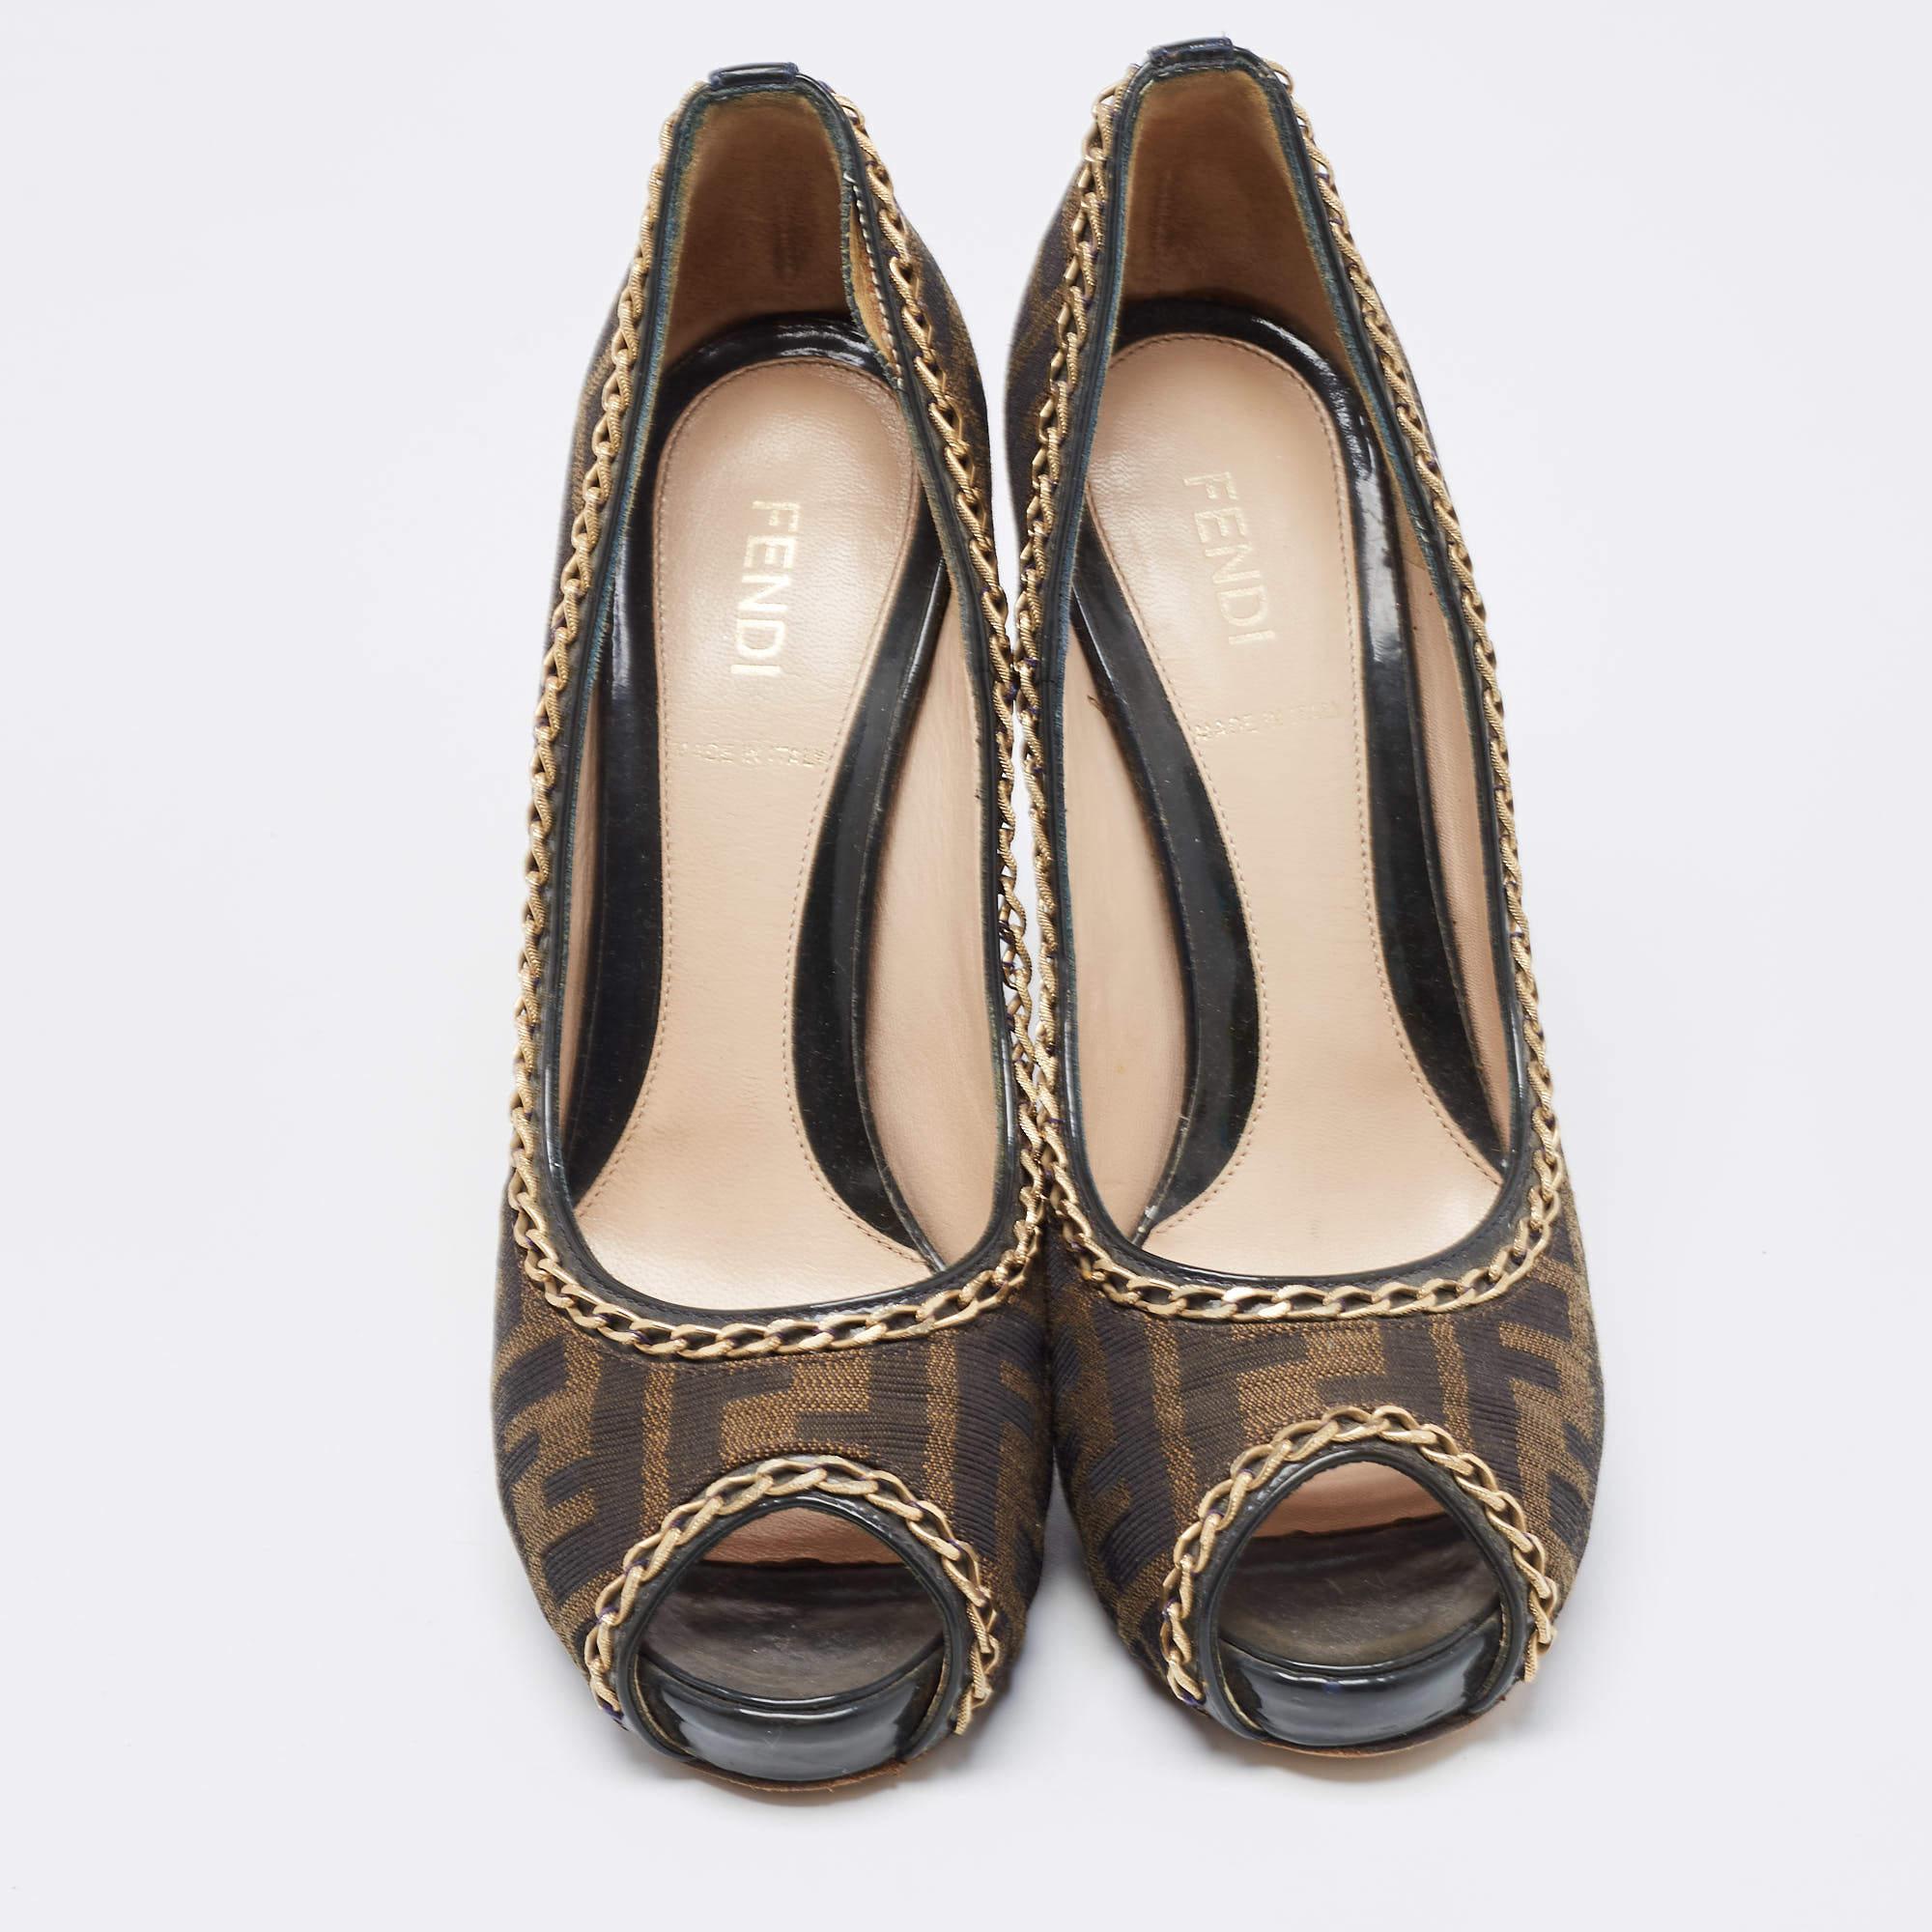 Make a style statement in true Fendi style with these gorgeous platform pumps! The women's pumps are crafted from Tobacco Zucca canvas and feature peep toes, chain embellishments, platforms, and 12.5cm heels.

